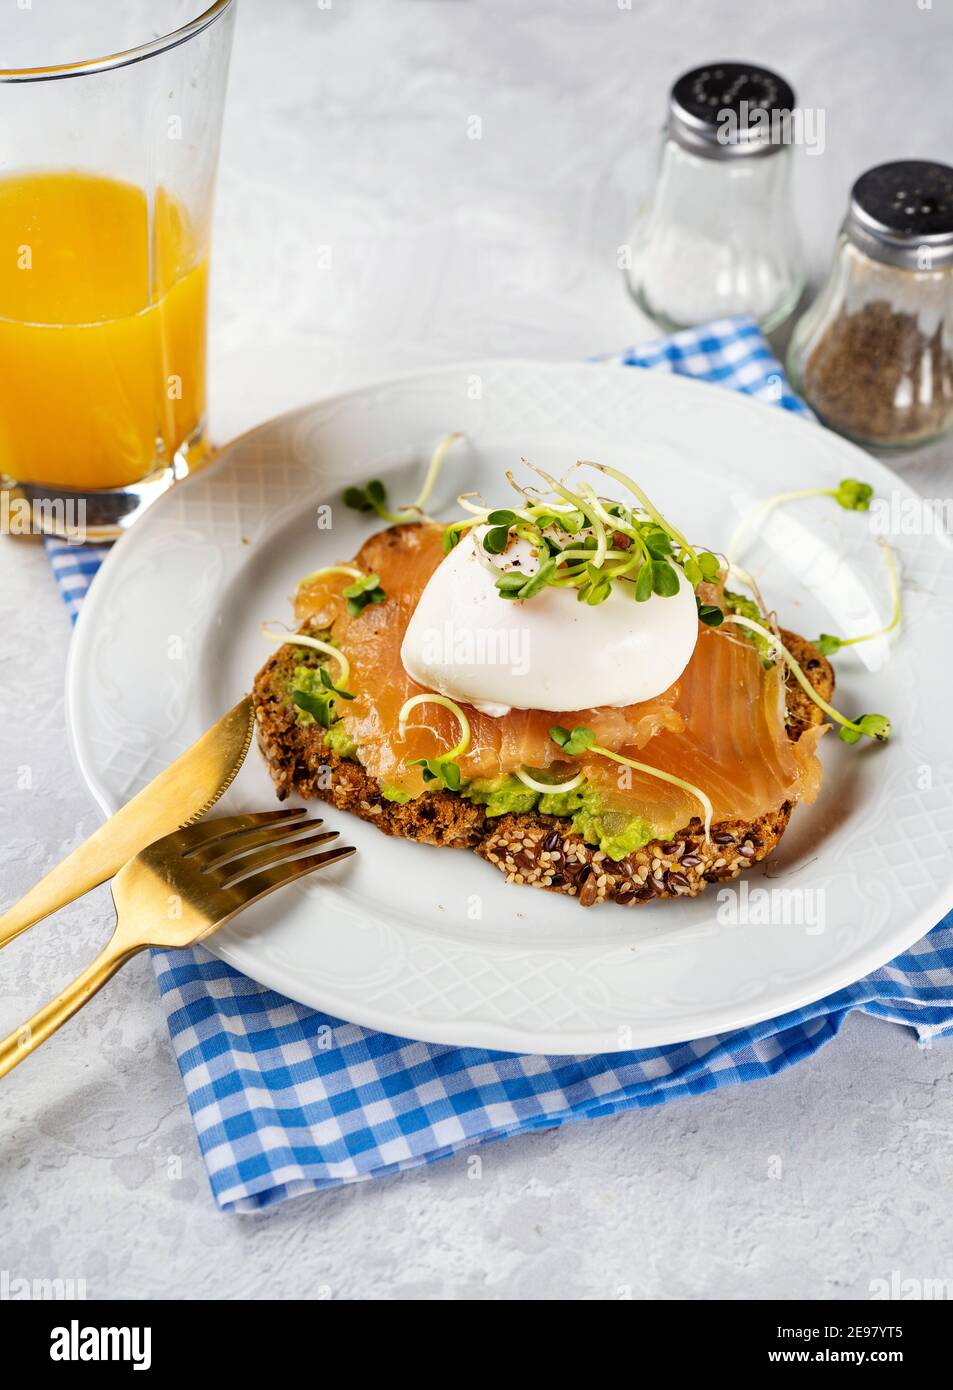 Breakfast toast with salmon and poached egg Stock Photo